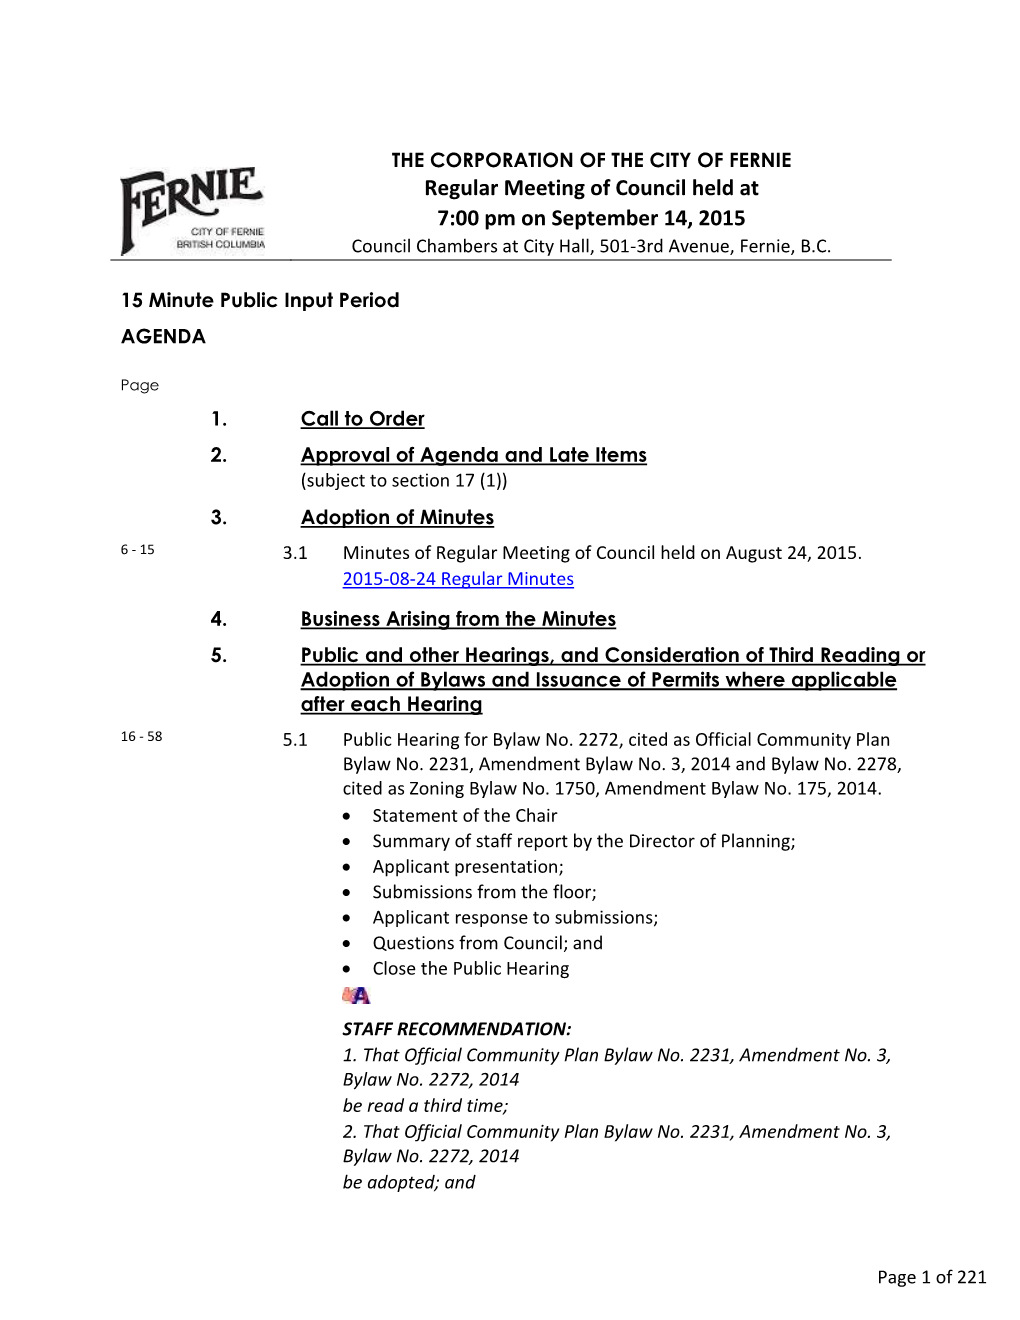 Regular Meeting of Council Held at 7:00 Pm on September 14, 2015 Council Chambers at City Hall, 501-3Rd Avenue, Fernie, B.C